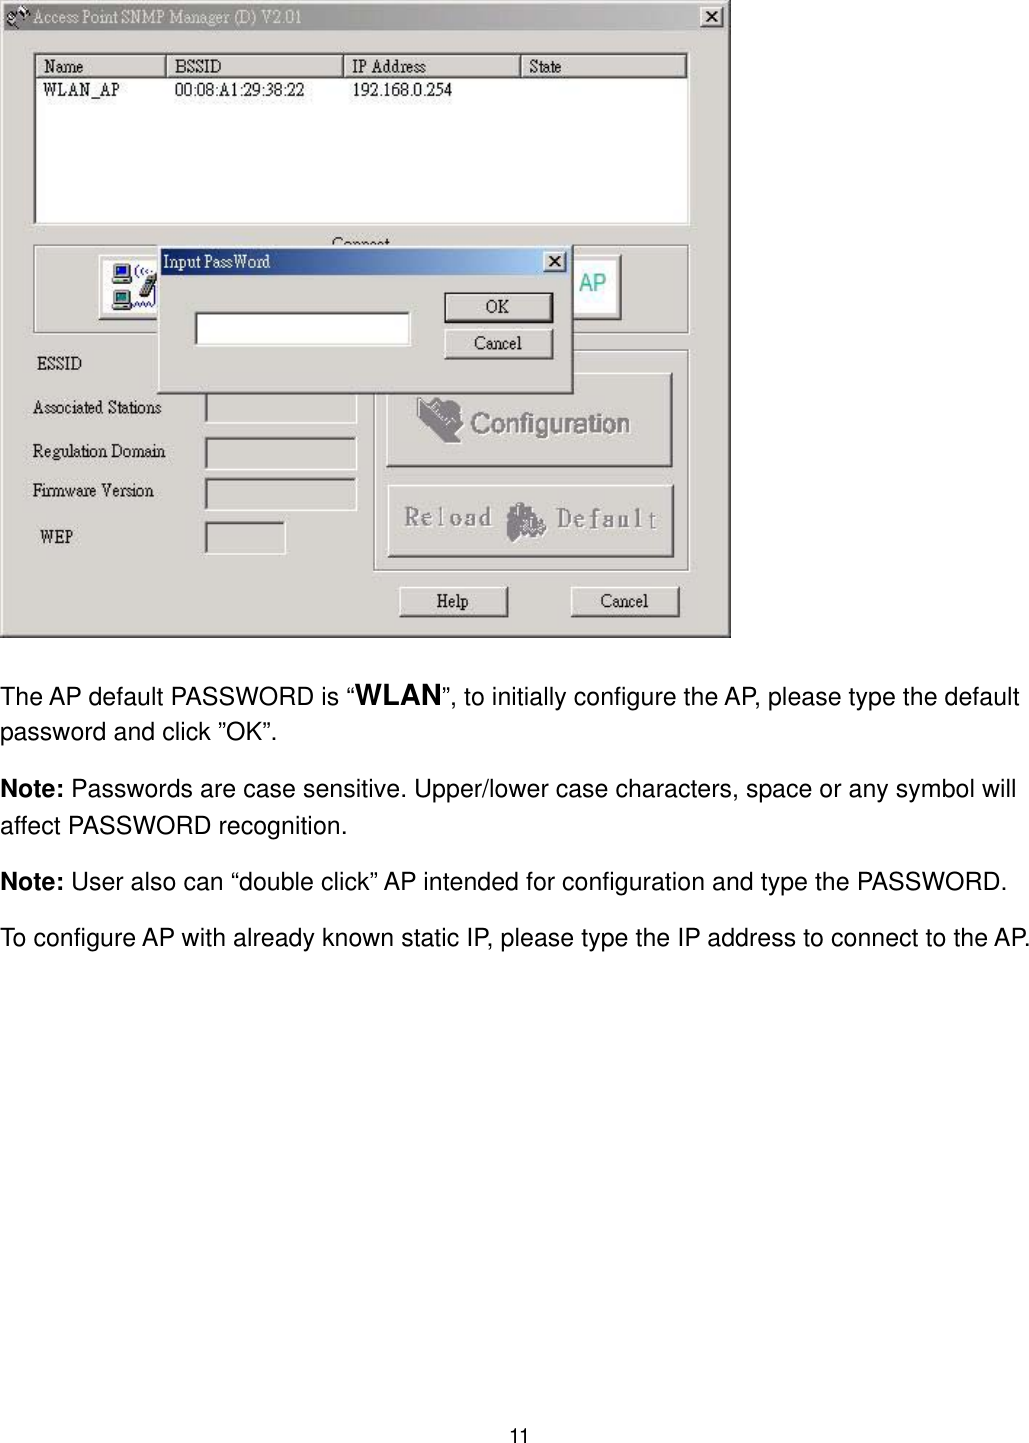  The AP default PASSWORD is “WLAN”, to initially configure the AP, please type the default password and click ”OK”. Note: Passwords are case sensitive. Upper/lower case characters, space or any symbol will affect PASSWORD recognition. Note: User also can “double click” AP intended for configuration and type the PASSWORD. To configure AP with already known static IP, please type the IP address to connect to the AP.  11